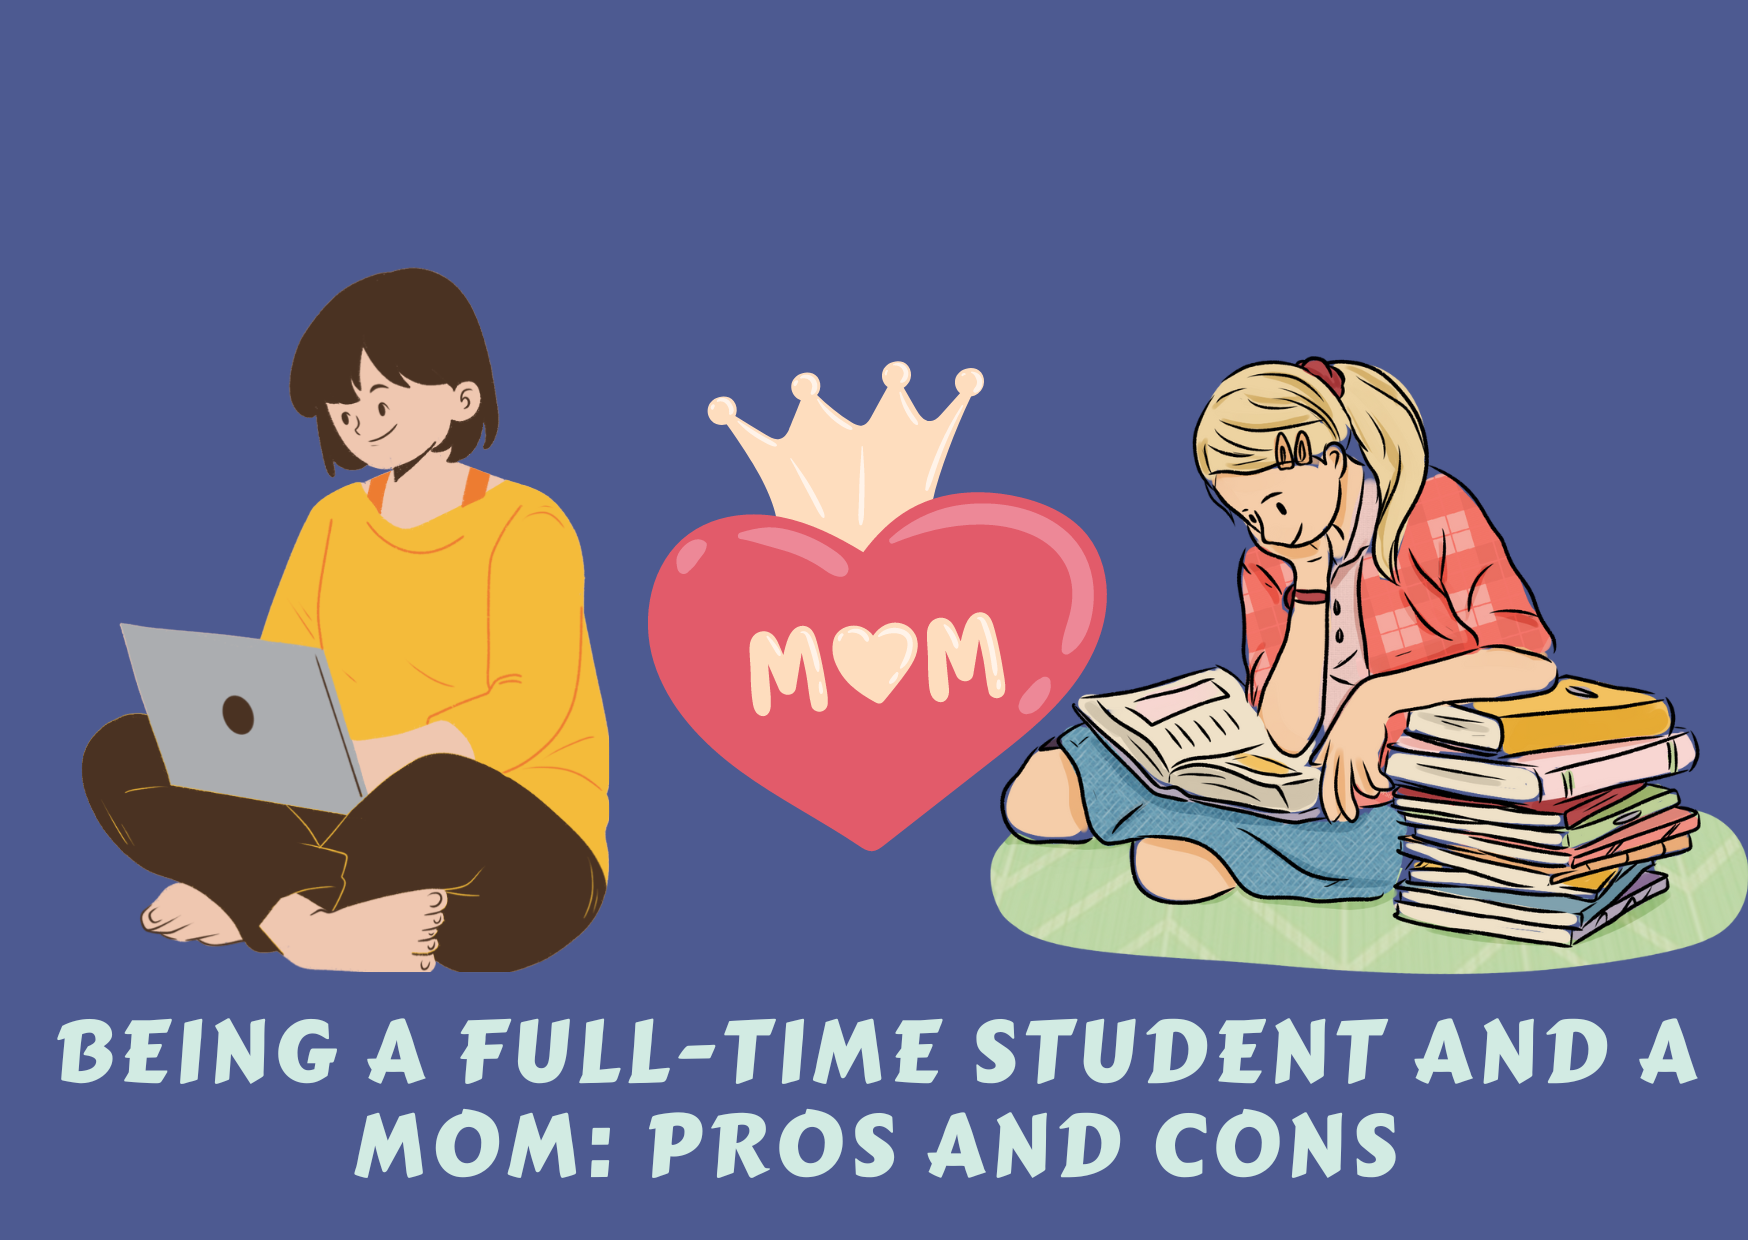 Being a Full-Time Student and a Mom: Pros and Cons